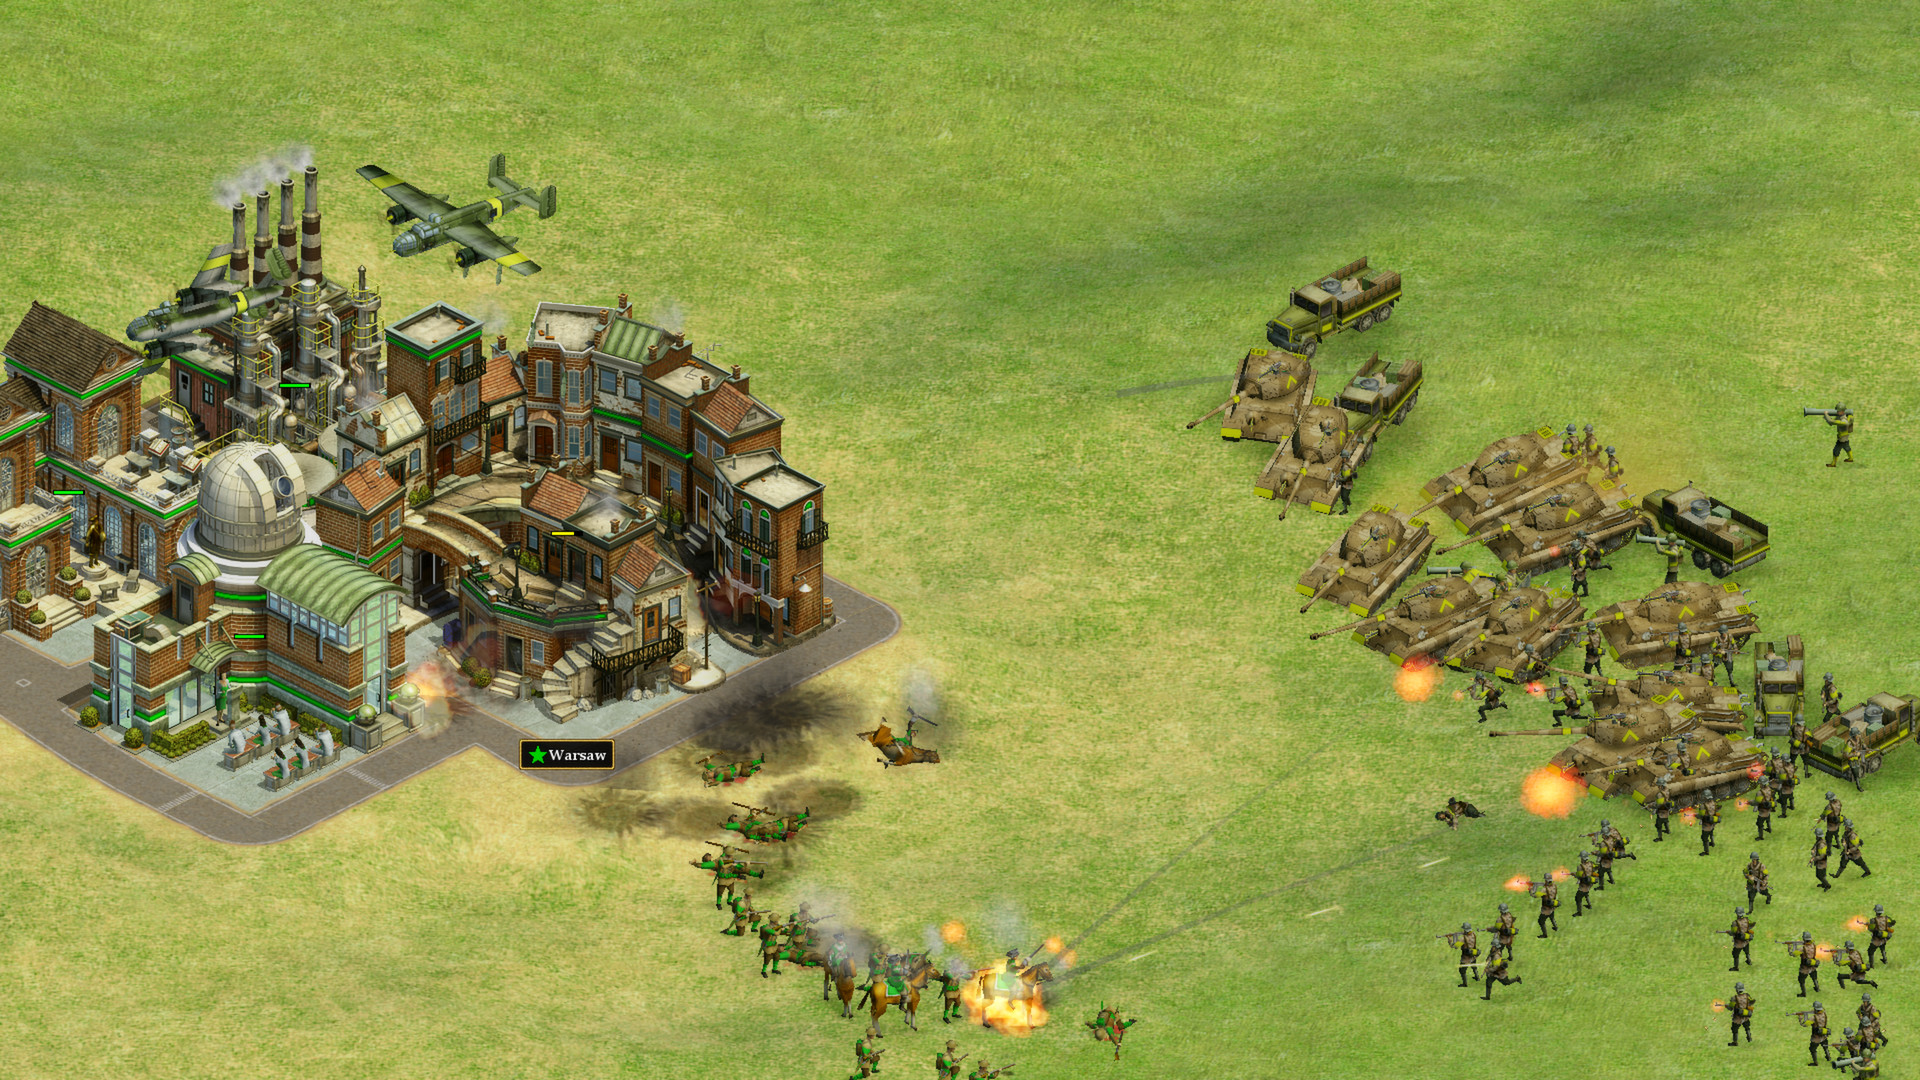 Conquer the World, Rise of Nations Wiki